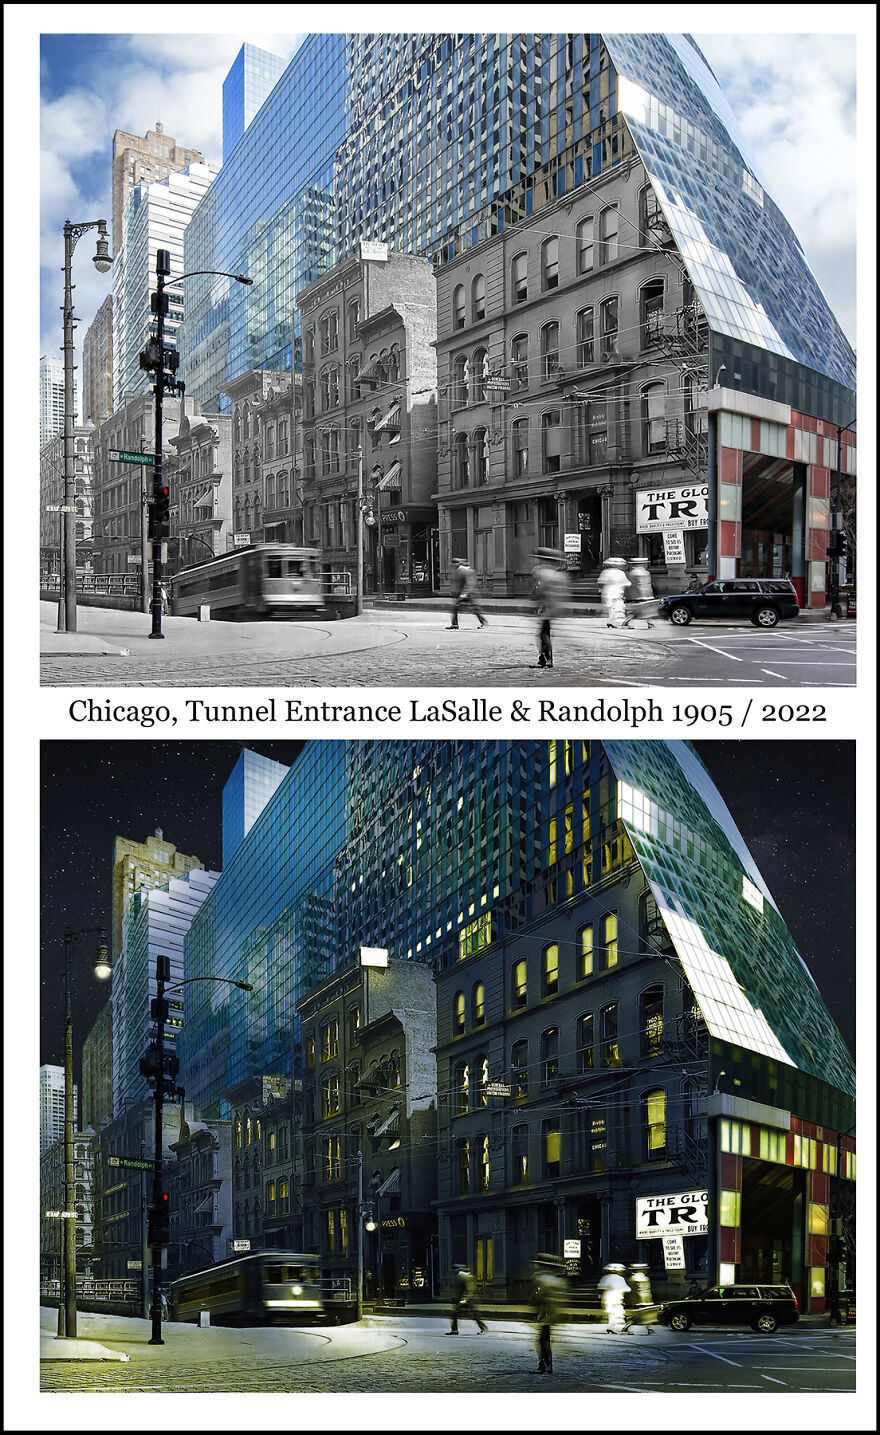 Day To Night: Chicago, Tunnel Entrance Lasalle & Randolph 1905 / 2022